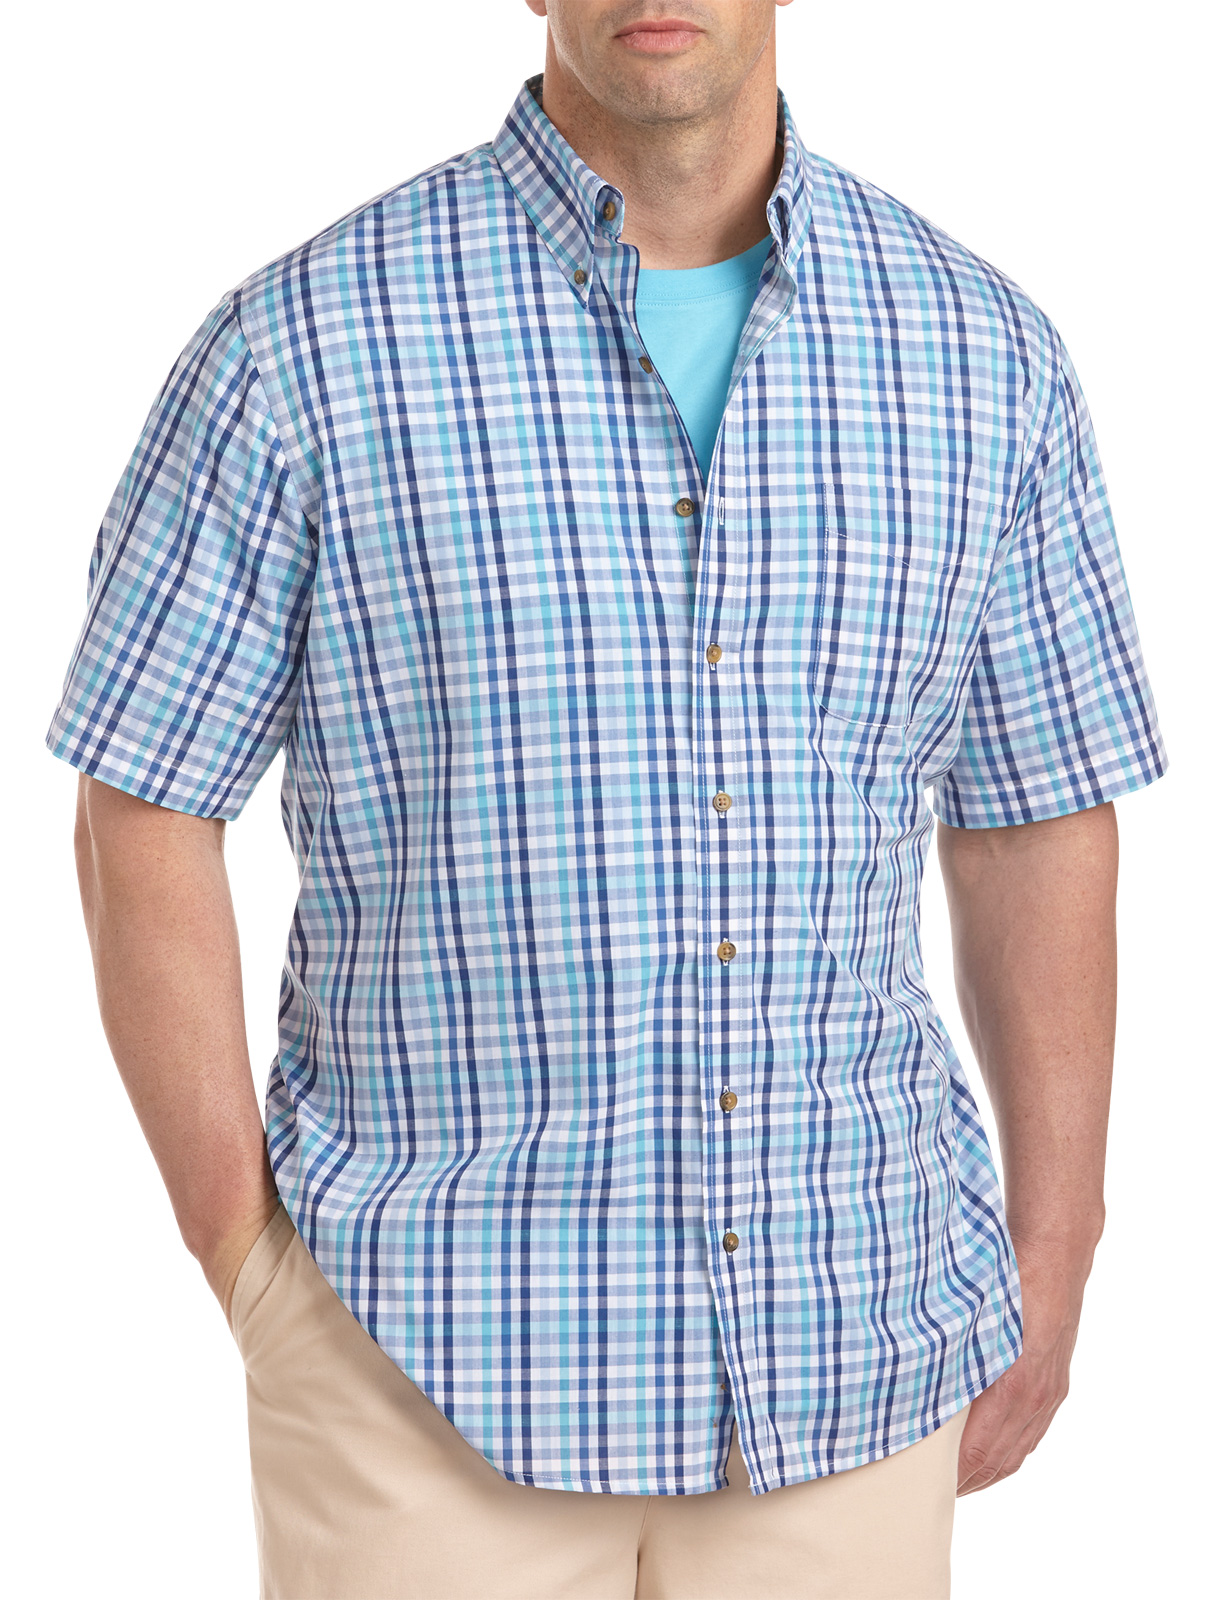 Harbor Bay Men's Big and Tall Easy-Care Small Plaid Sport Shirt